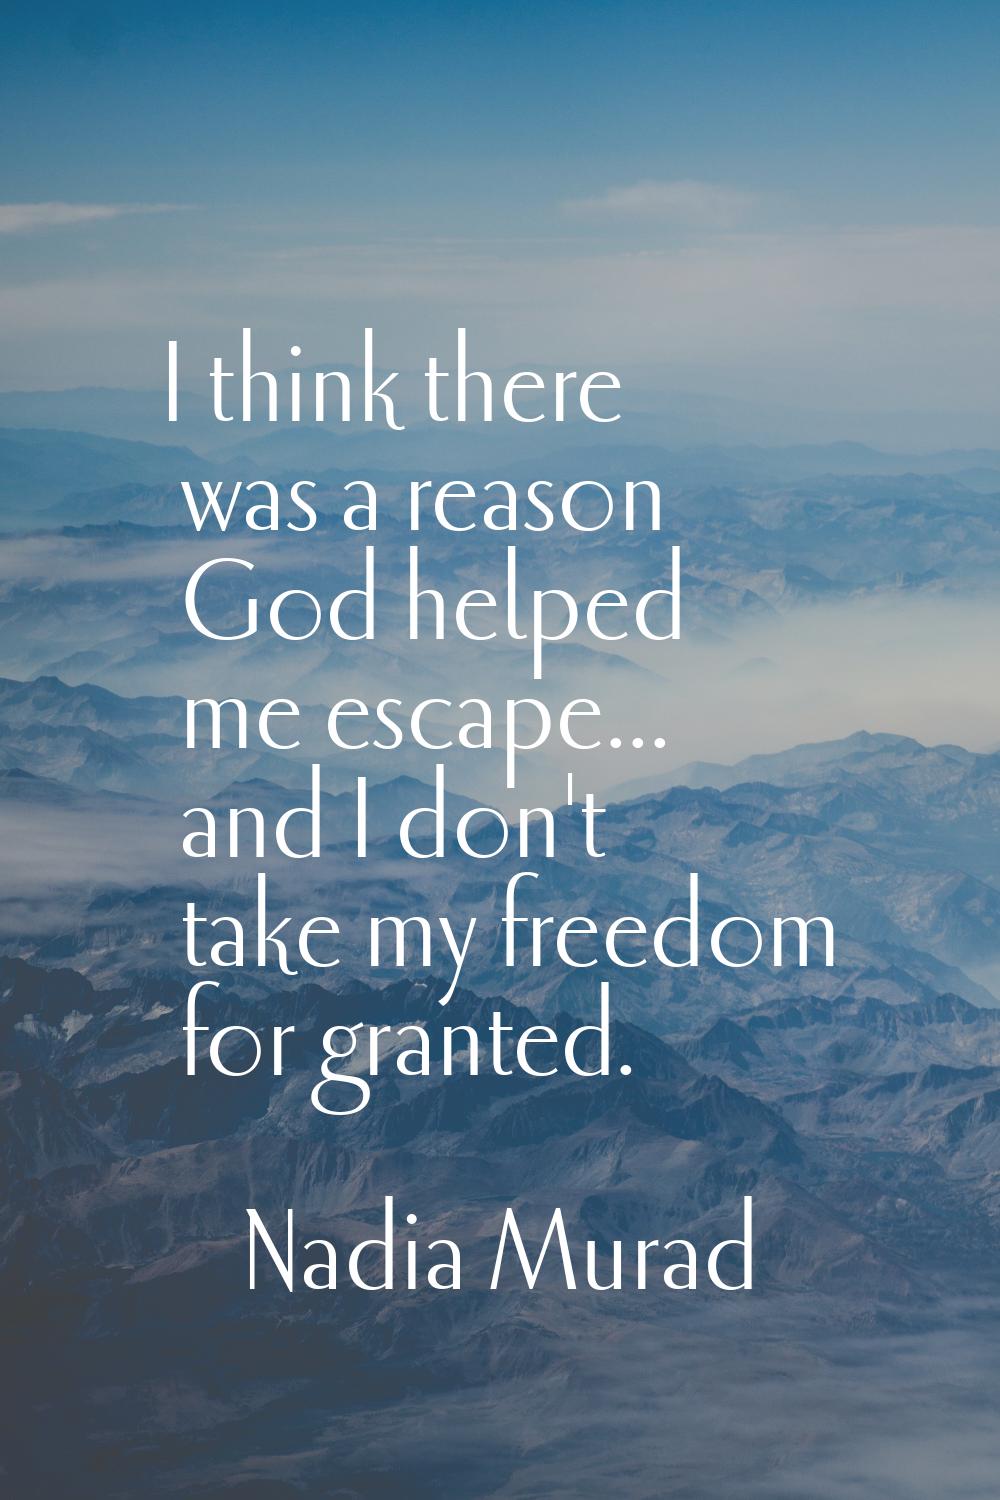 I think there was a reason God helped me escape... and I don't take my freedom for granted.